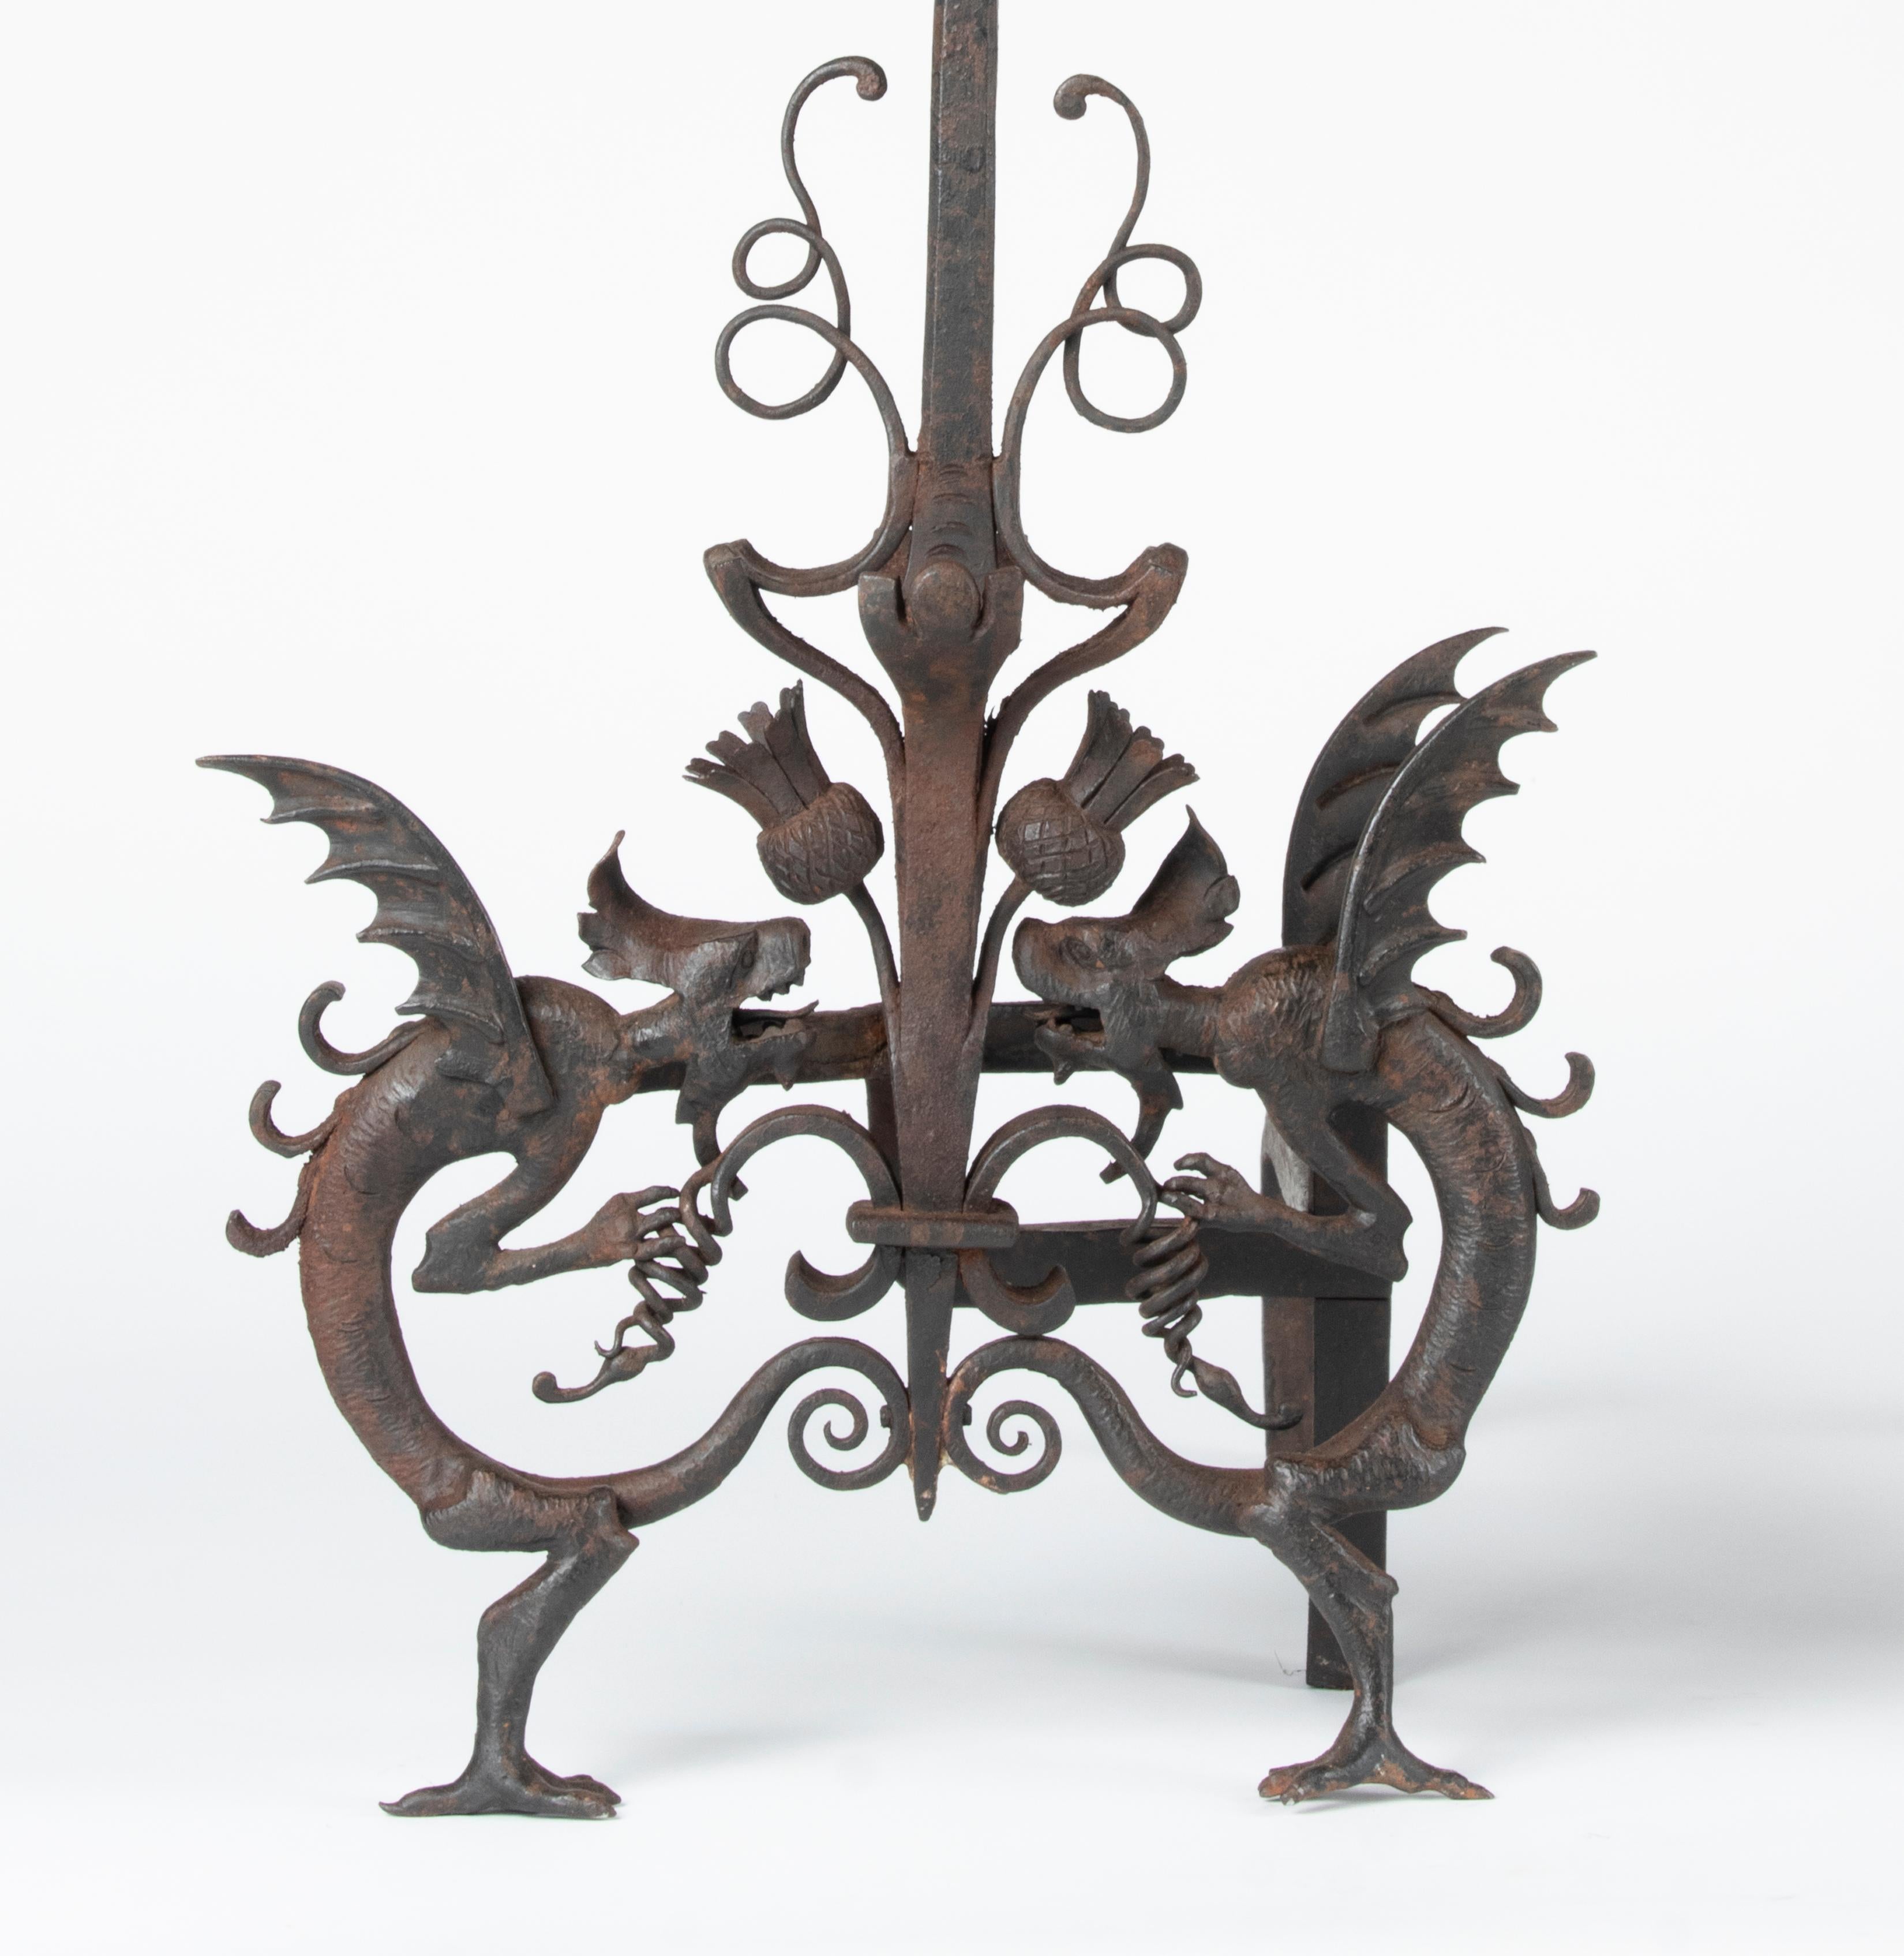 French Arts & Crafts Samuel Yellin Style Wrought Iron Dragon Andirons or Fire Dogs For Sale